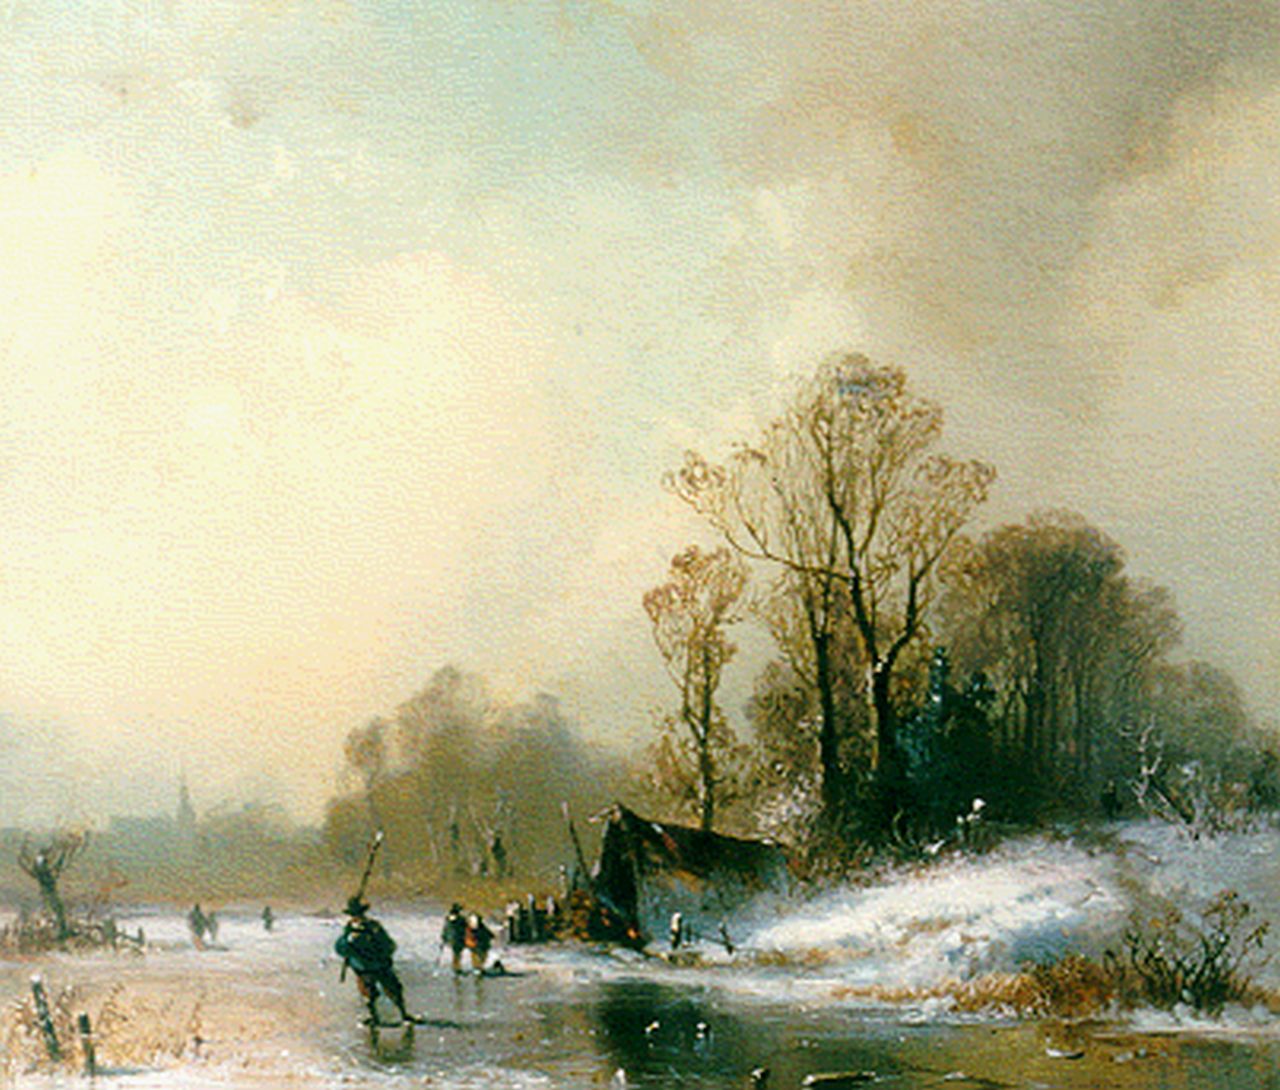 Stademann A.  | Adolf Stademann, A winter landscape with skaters on the ice, oil on panel 23.1 x 27.0 cm, signed l.r.